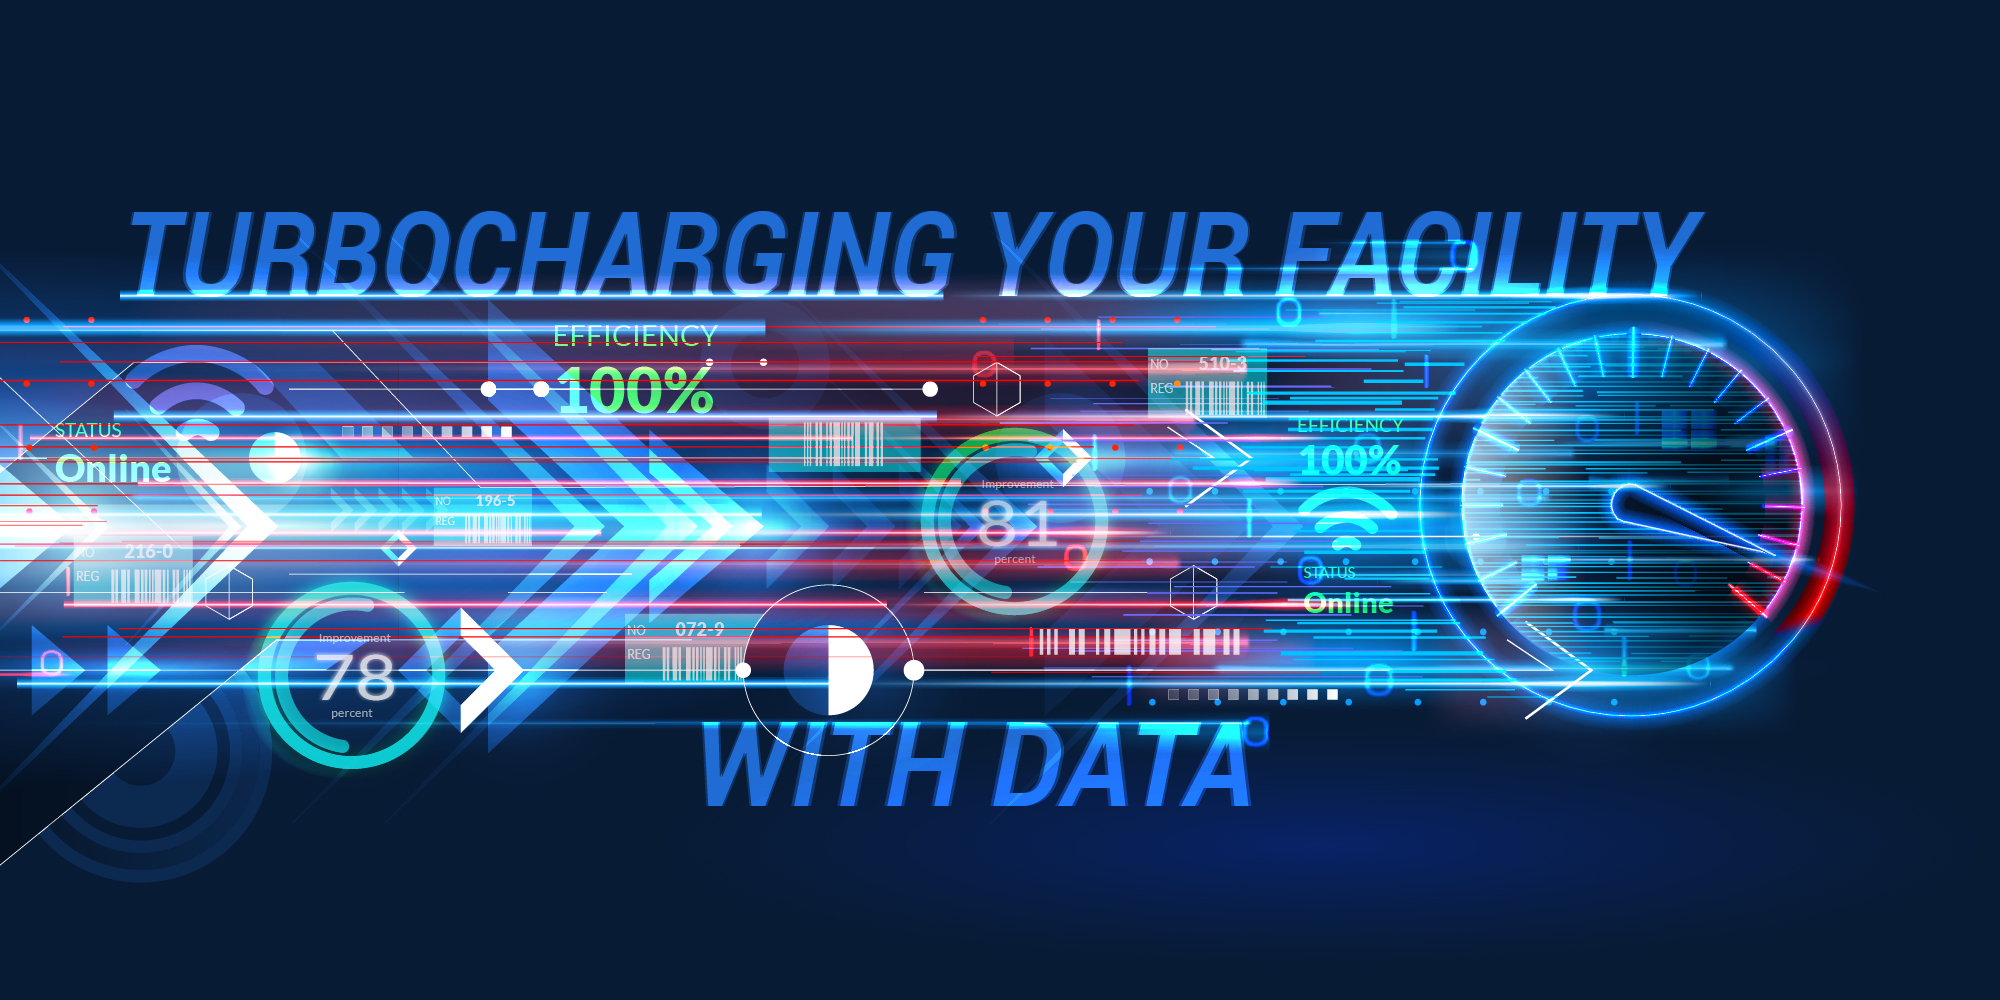 Turbocharging Your Facility With Data